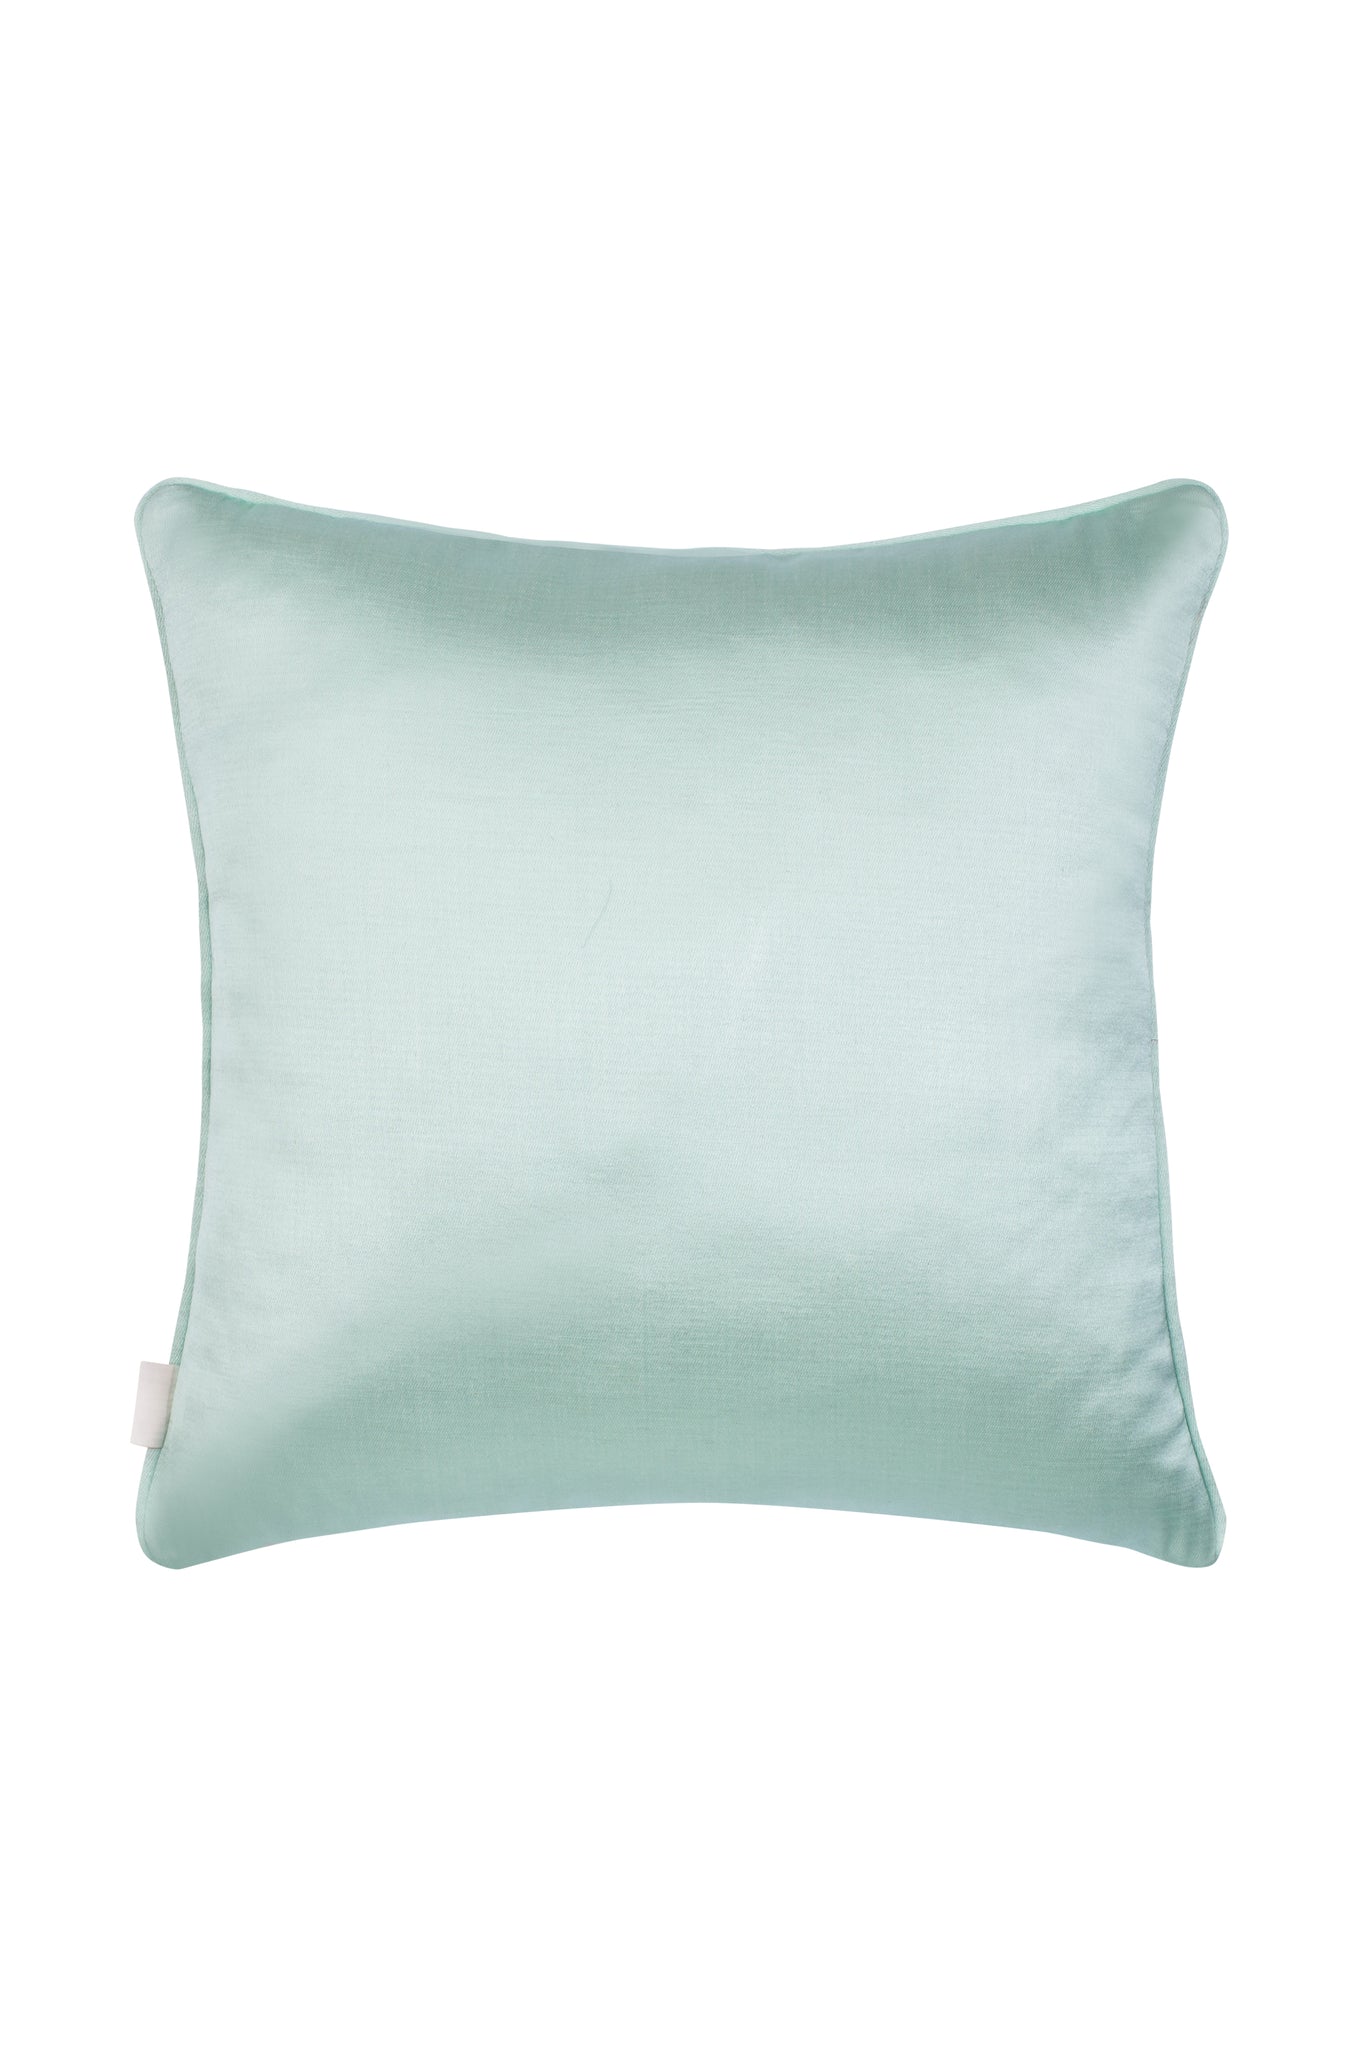 Spice Road Classic Pillow